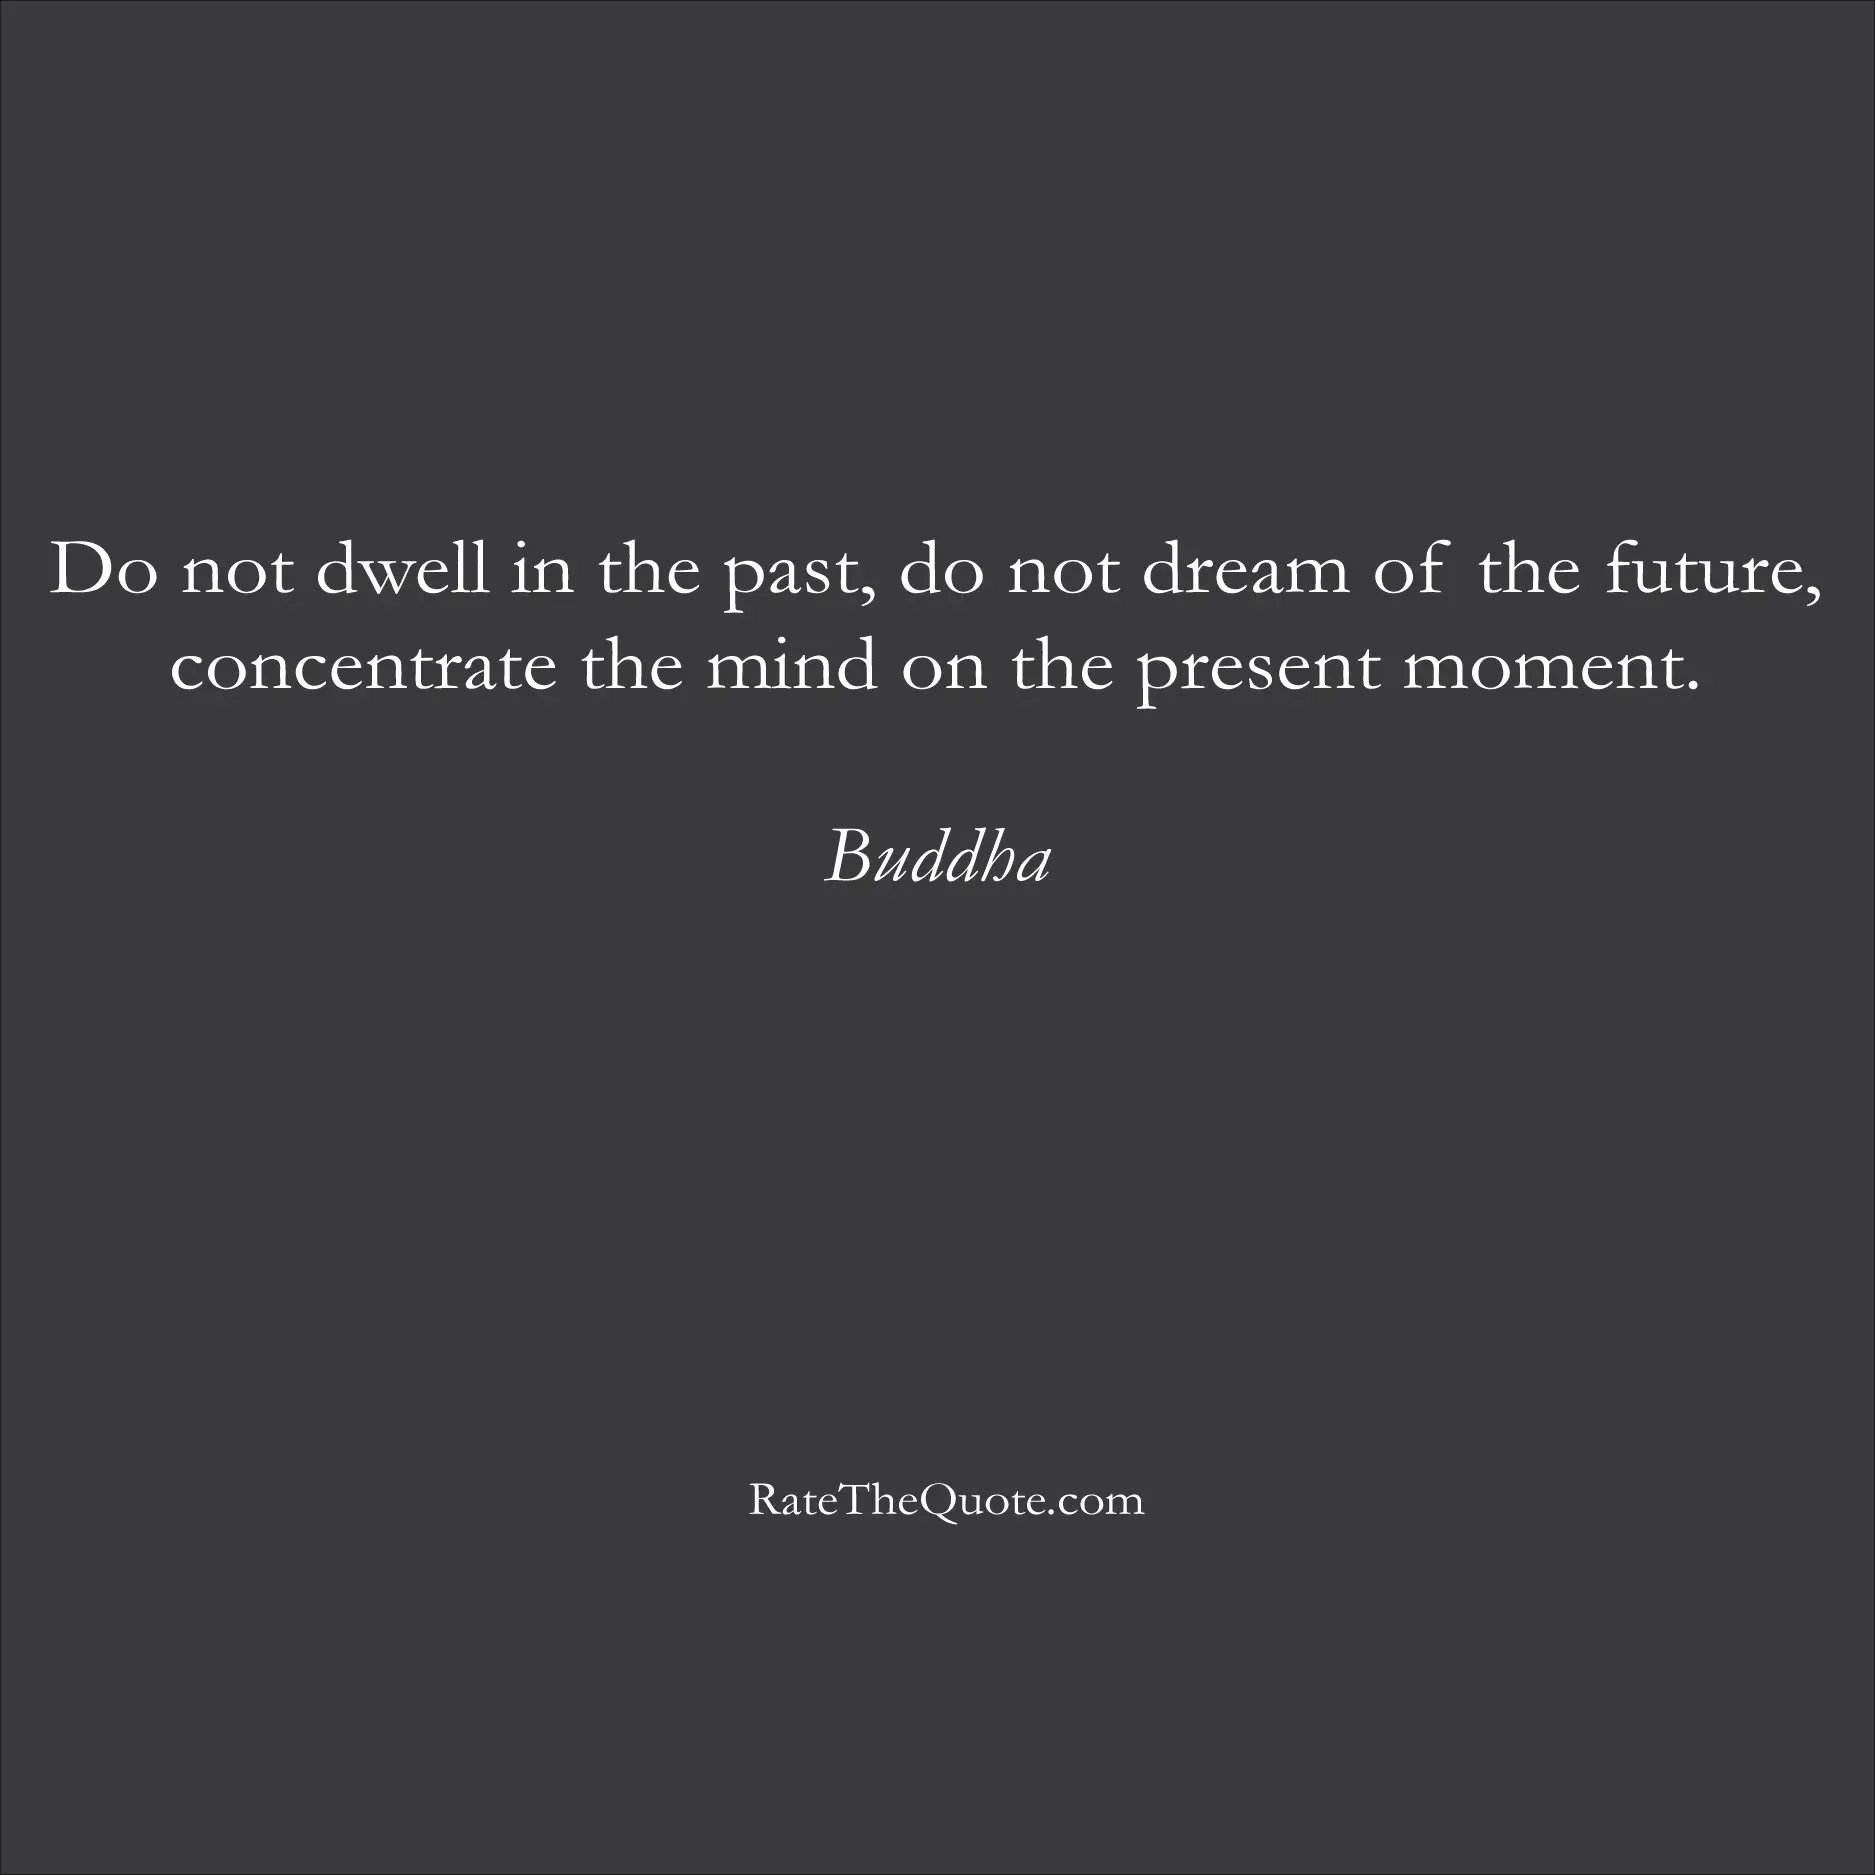 Life Quotes Do not dwell in the past, do not dream of the future, concentrate the mind on the present moment. Buddha